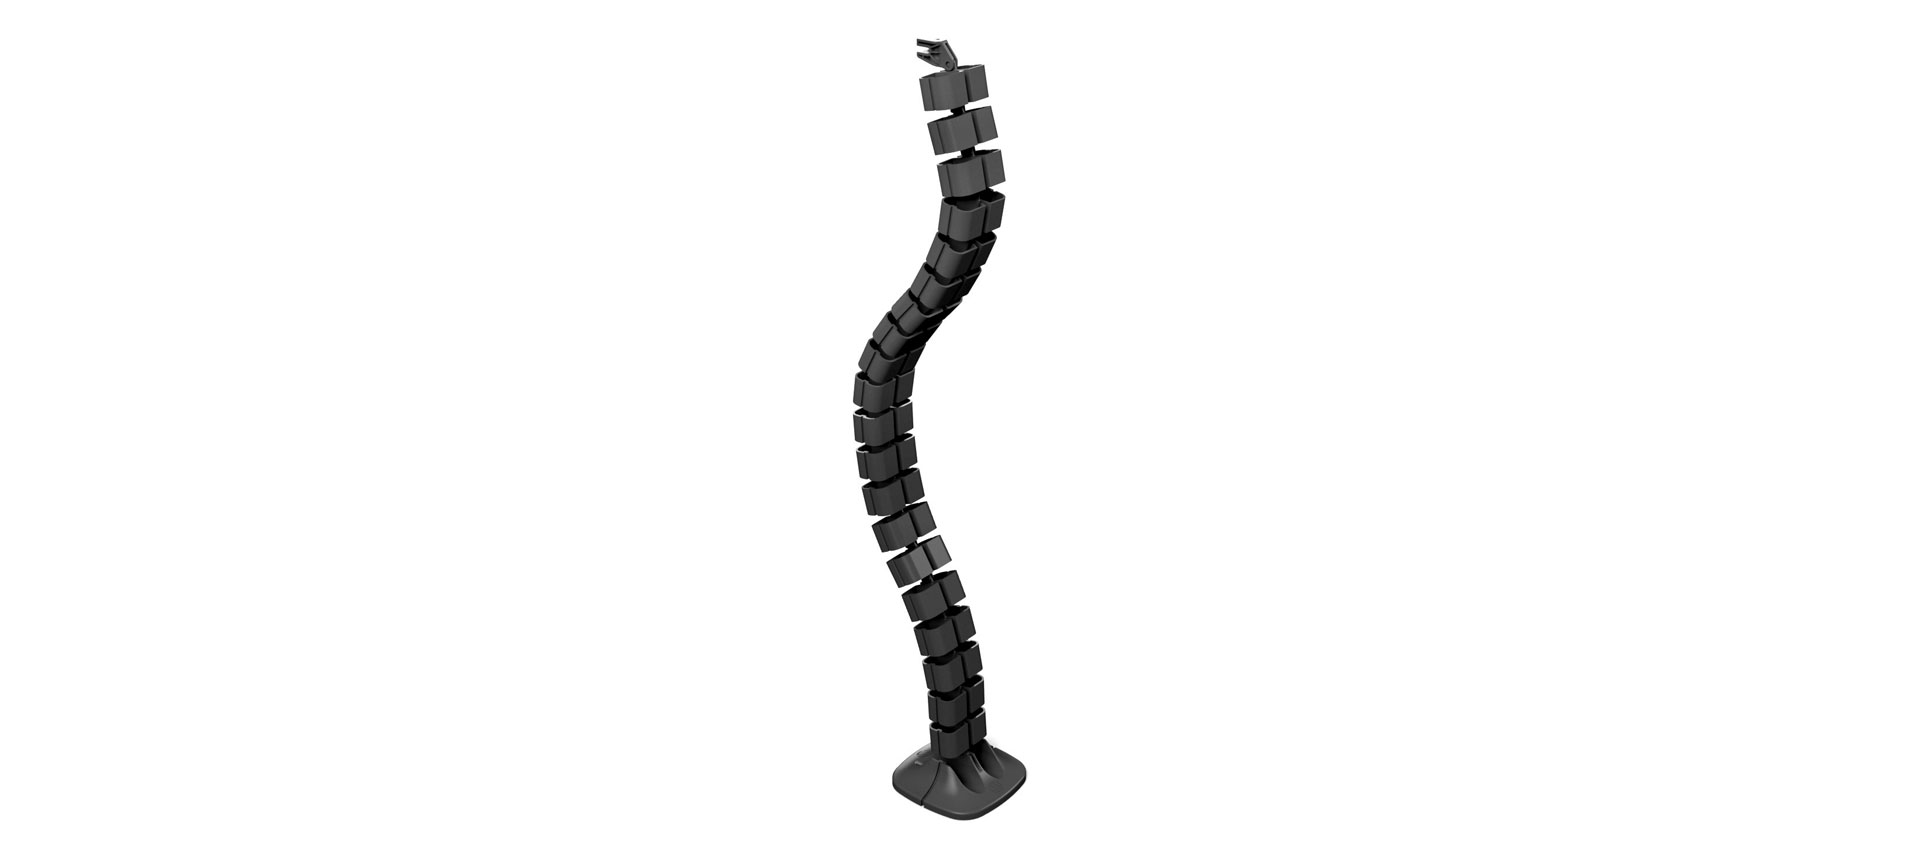 Linx cable management spine